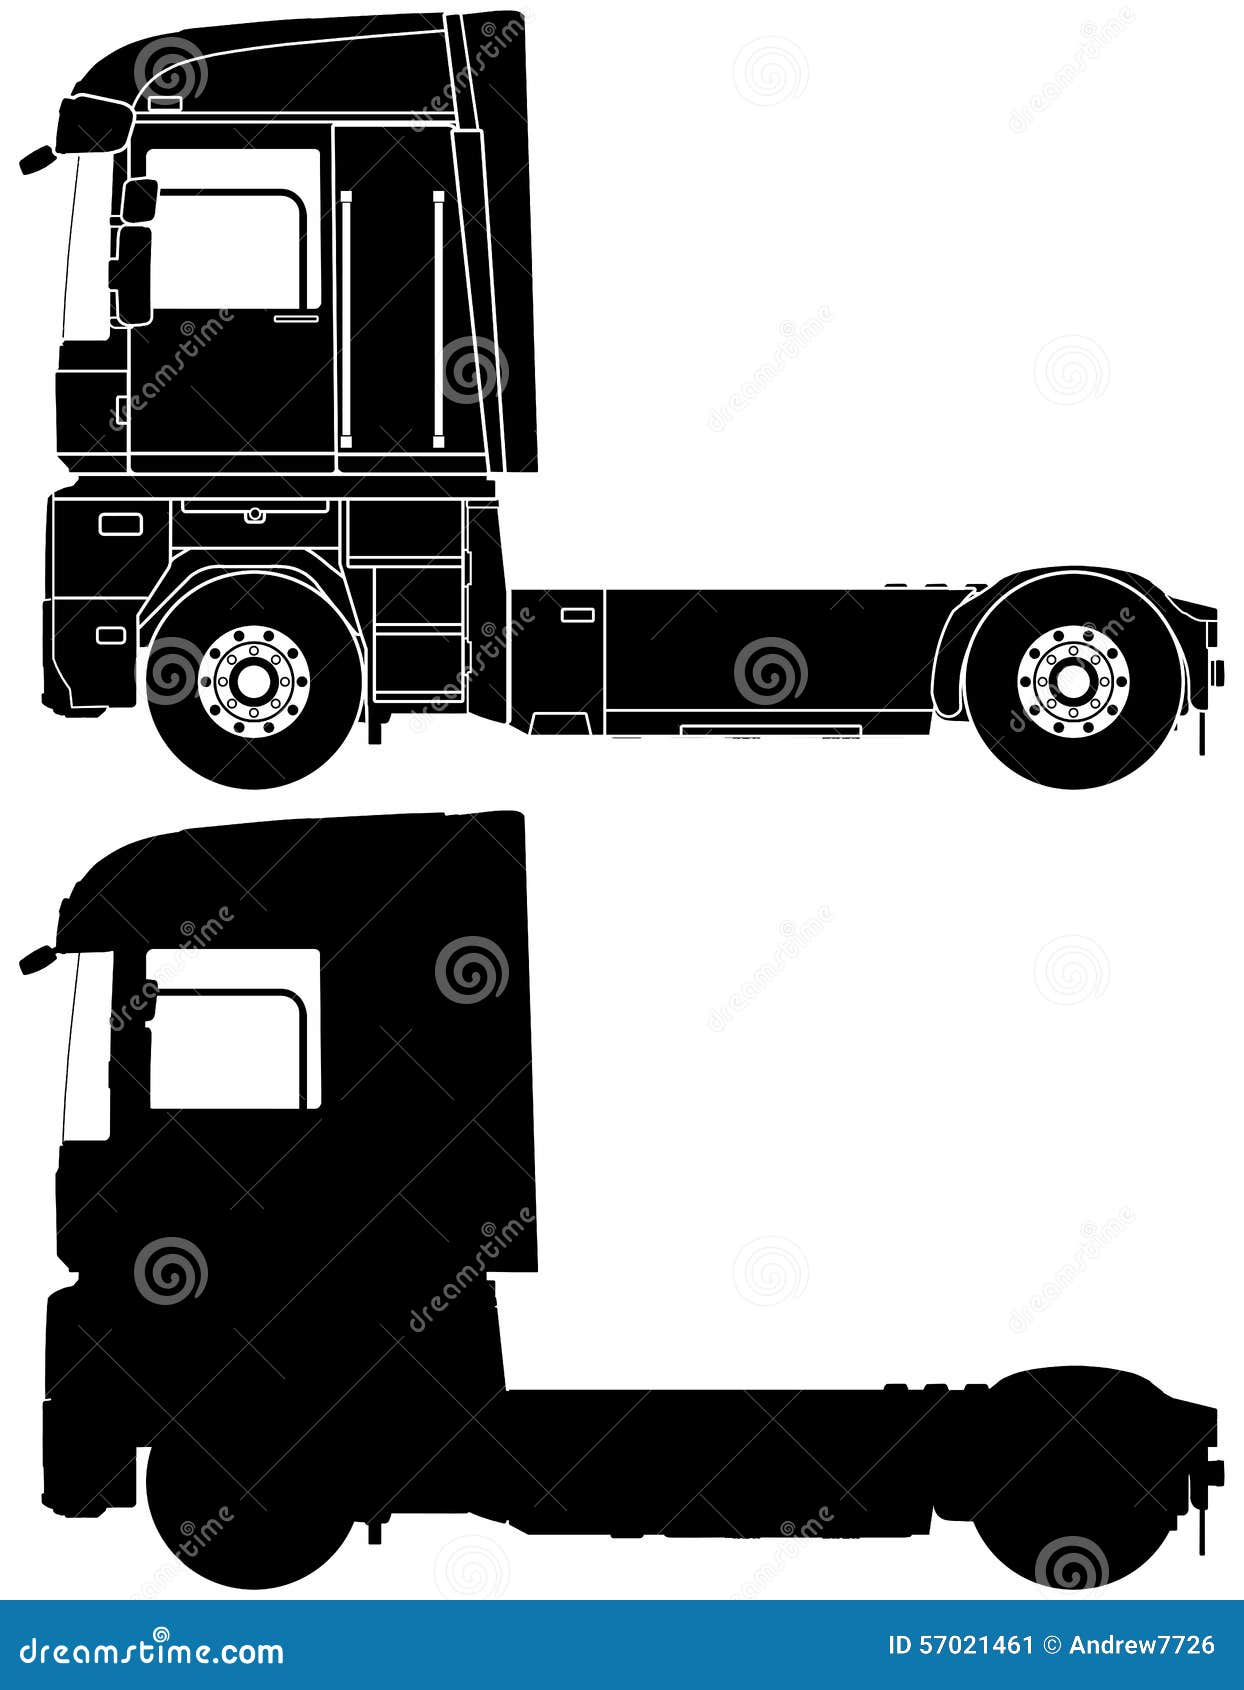 silhouette of a truck renault magnum.